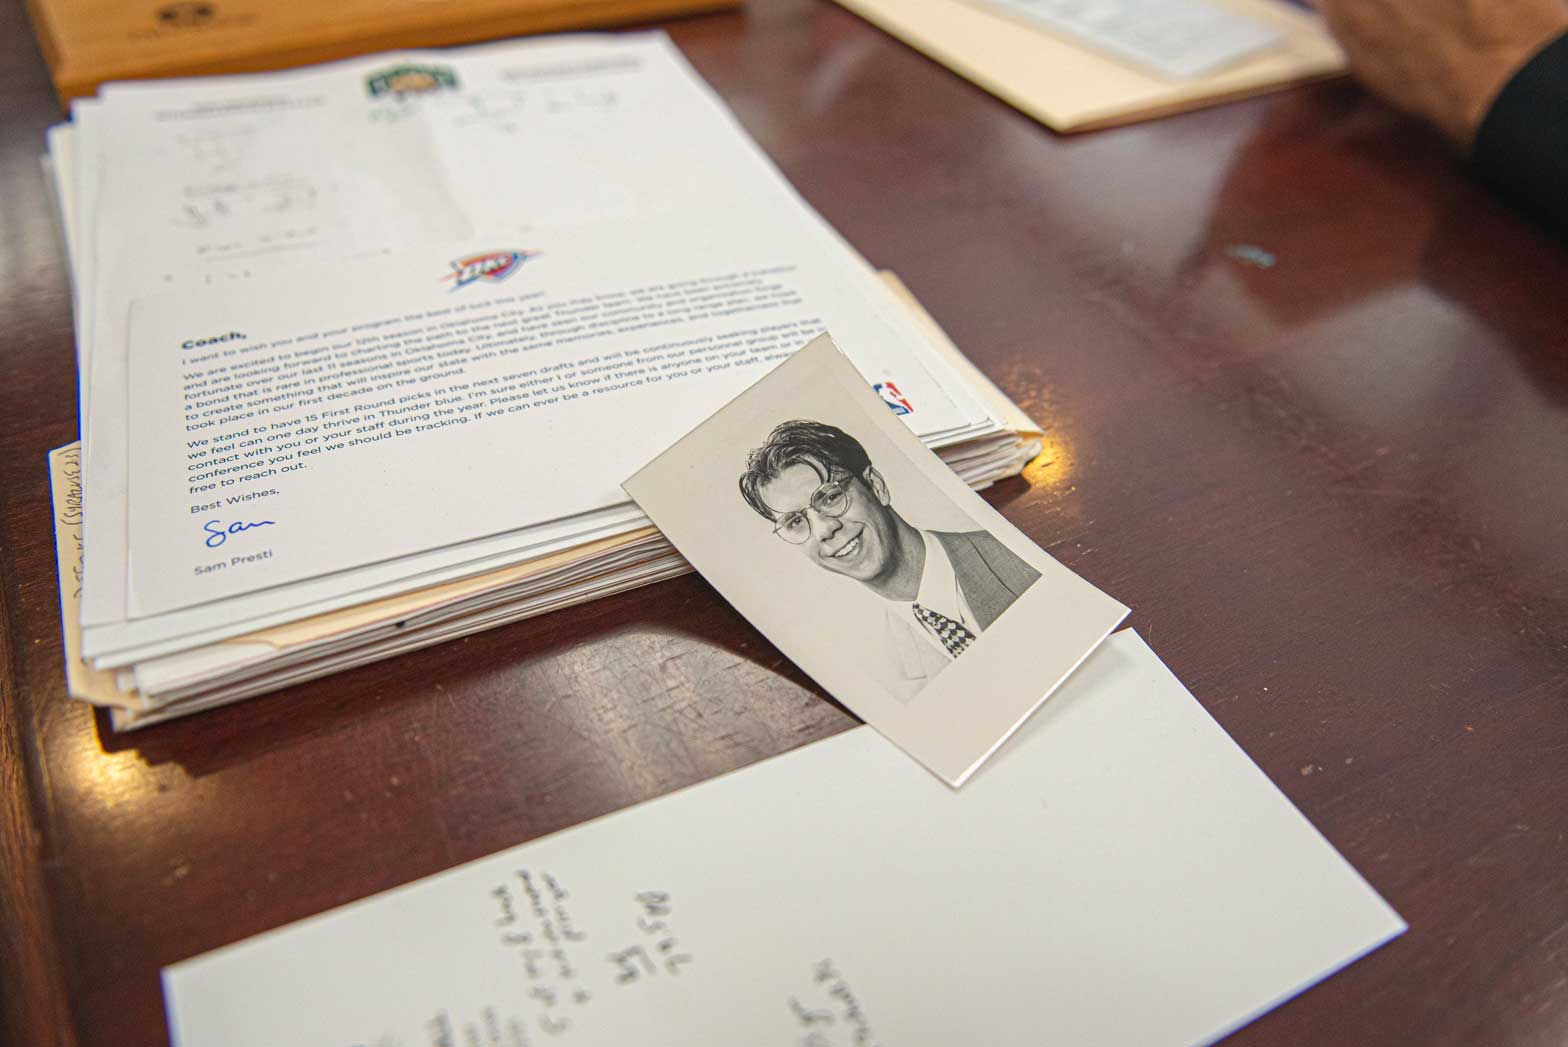 A small portrait of young Coach Boals sitting next to papers on his desk.